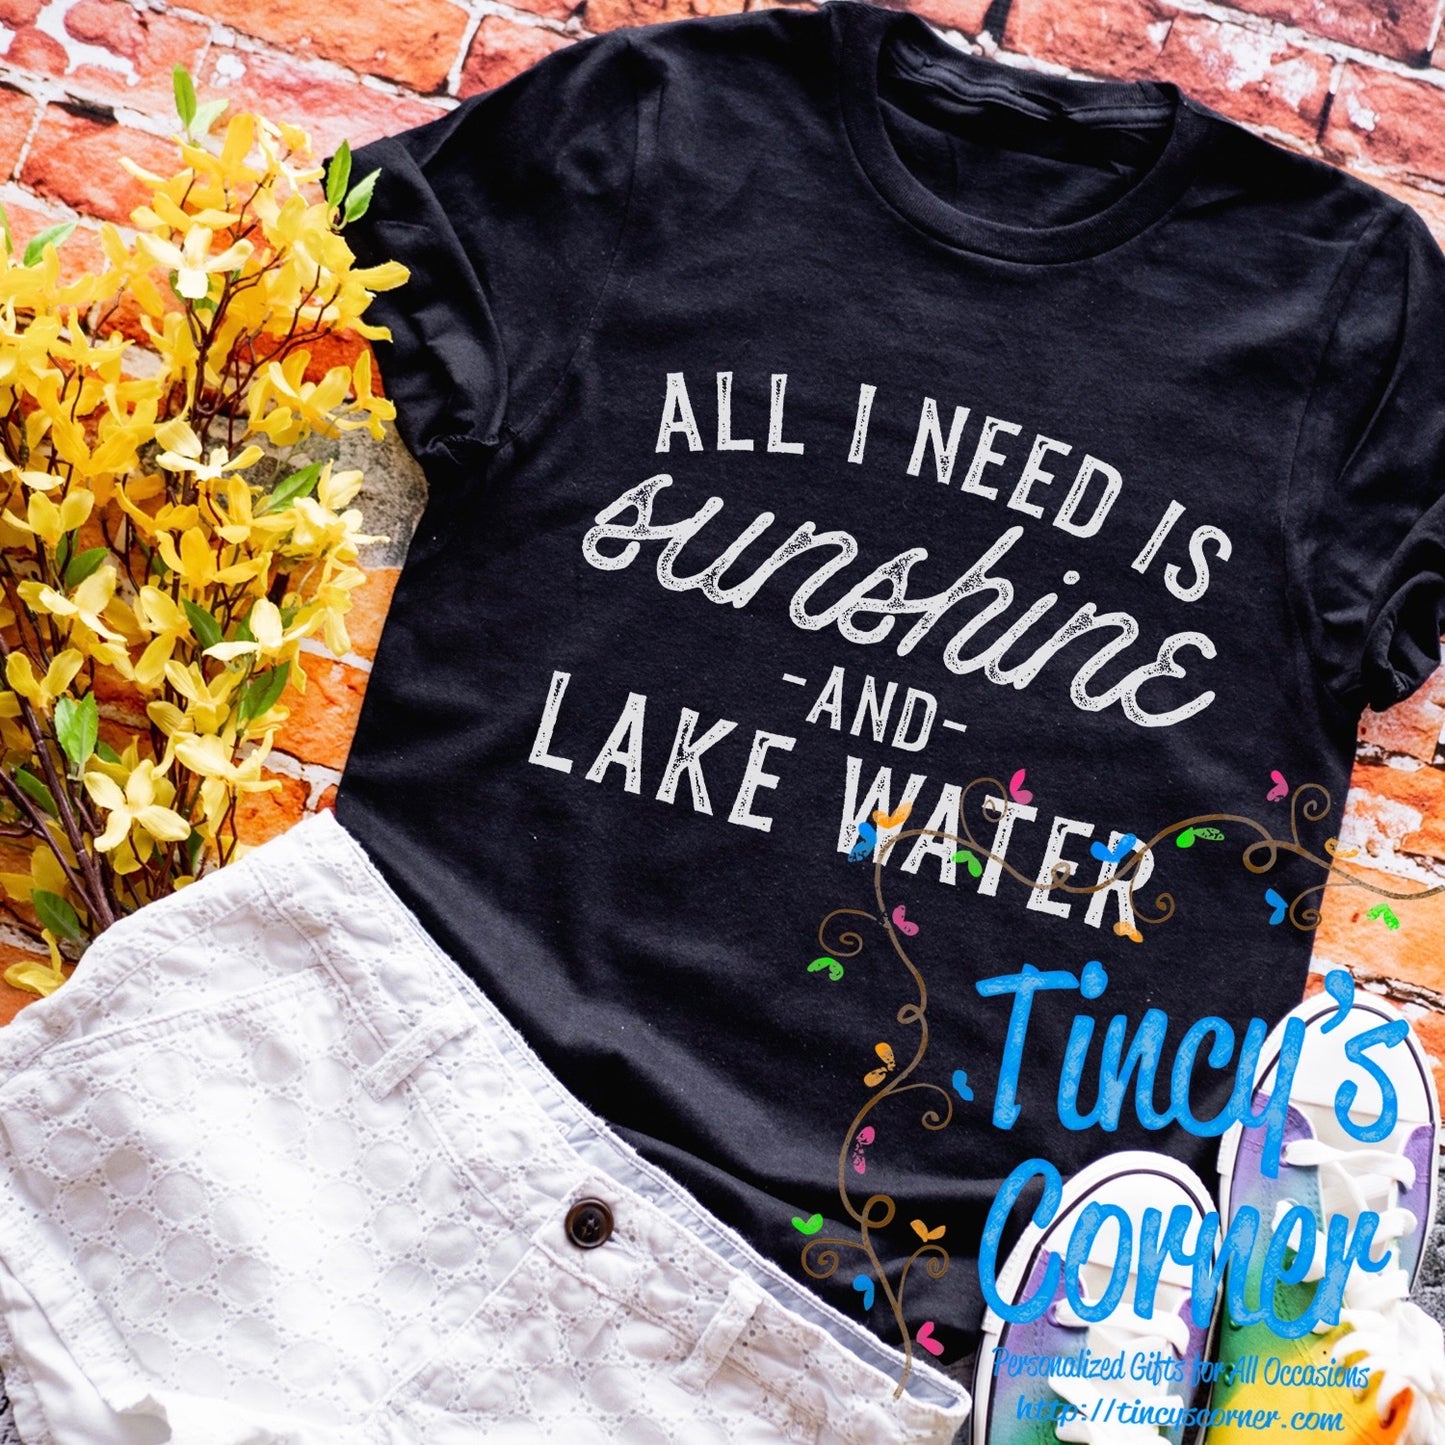 All I Need is Lake Water SPT